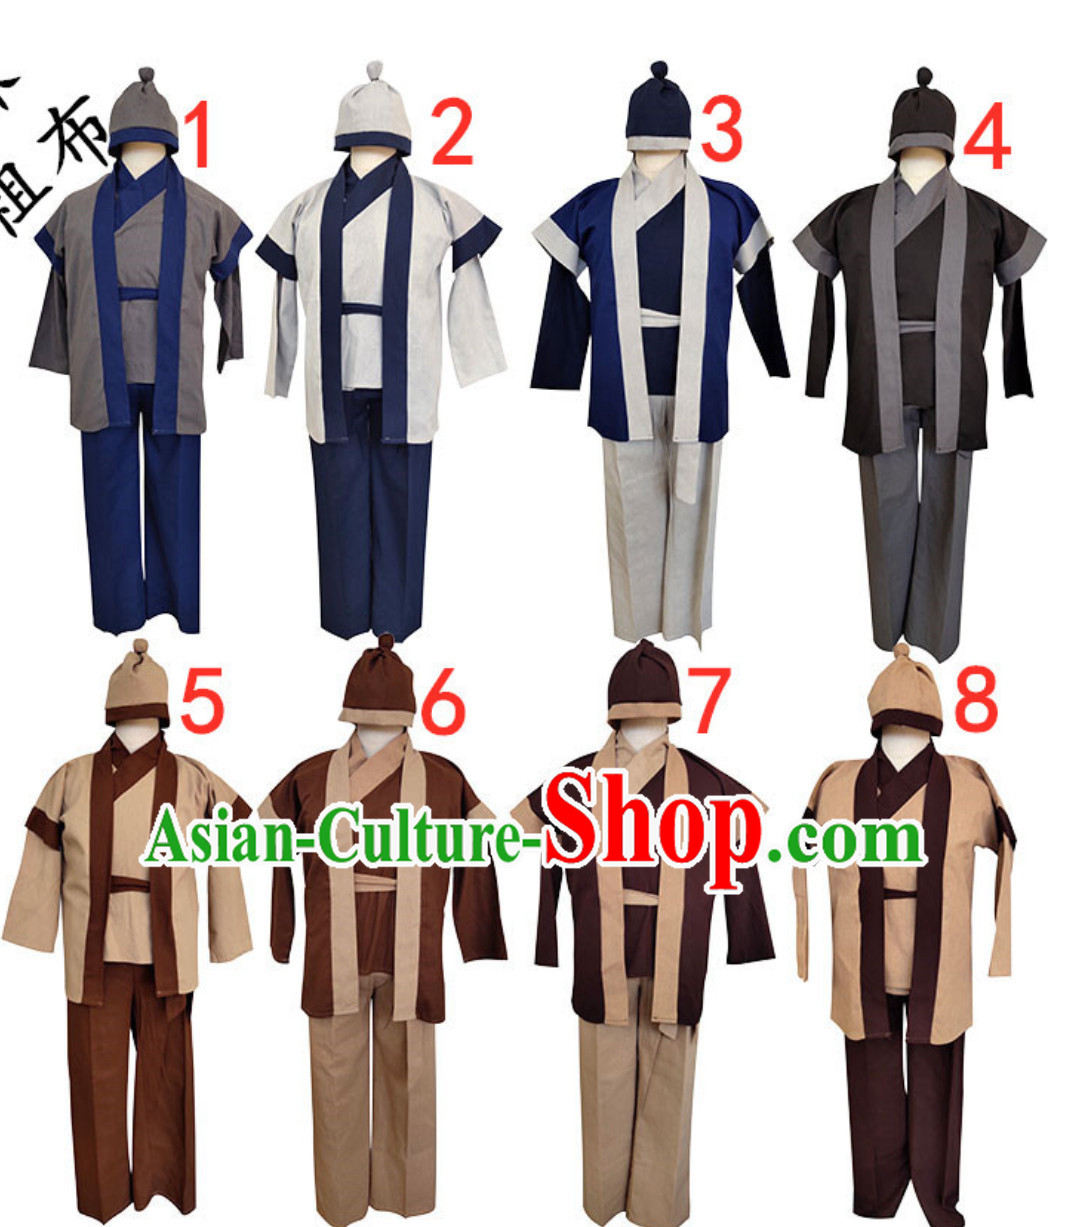 Ancient Chinese Servant Costume Poor People Clothes Costume Farmer Costumes Chinese Civilian Costumes for Men and Women